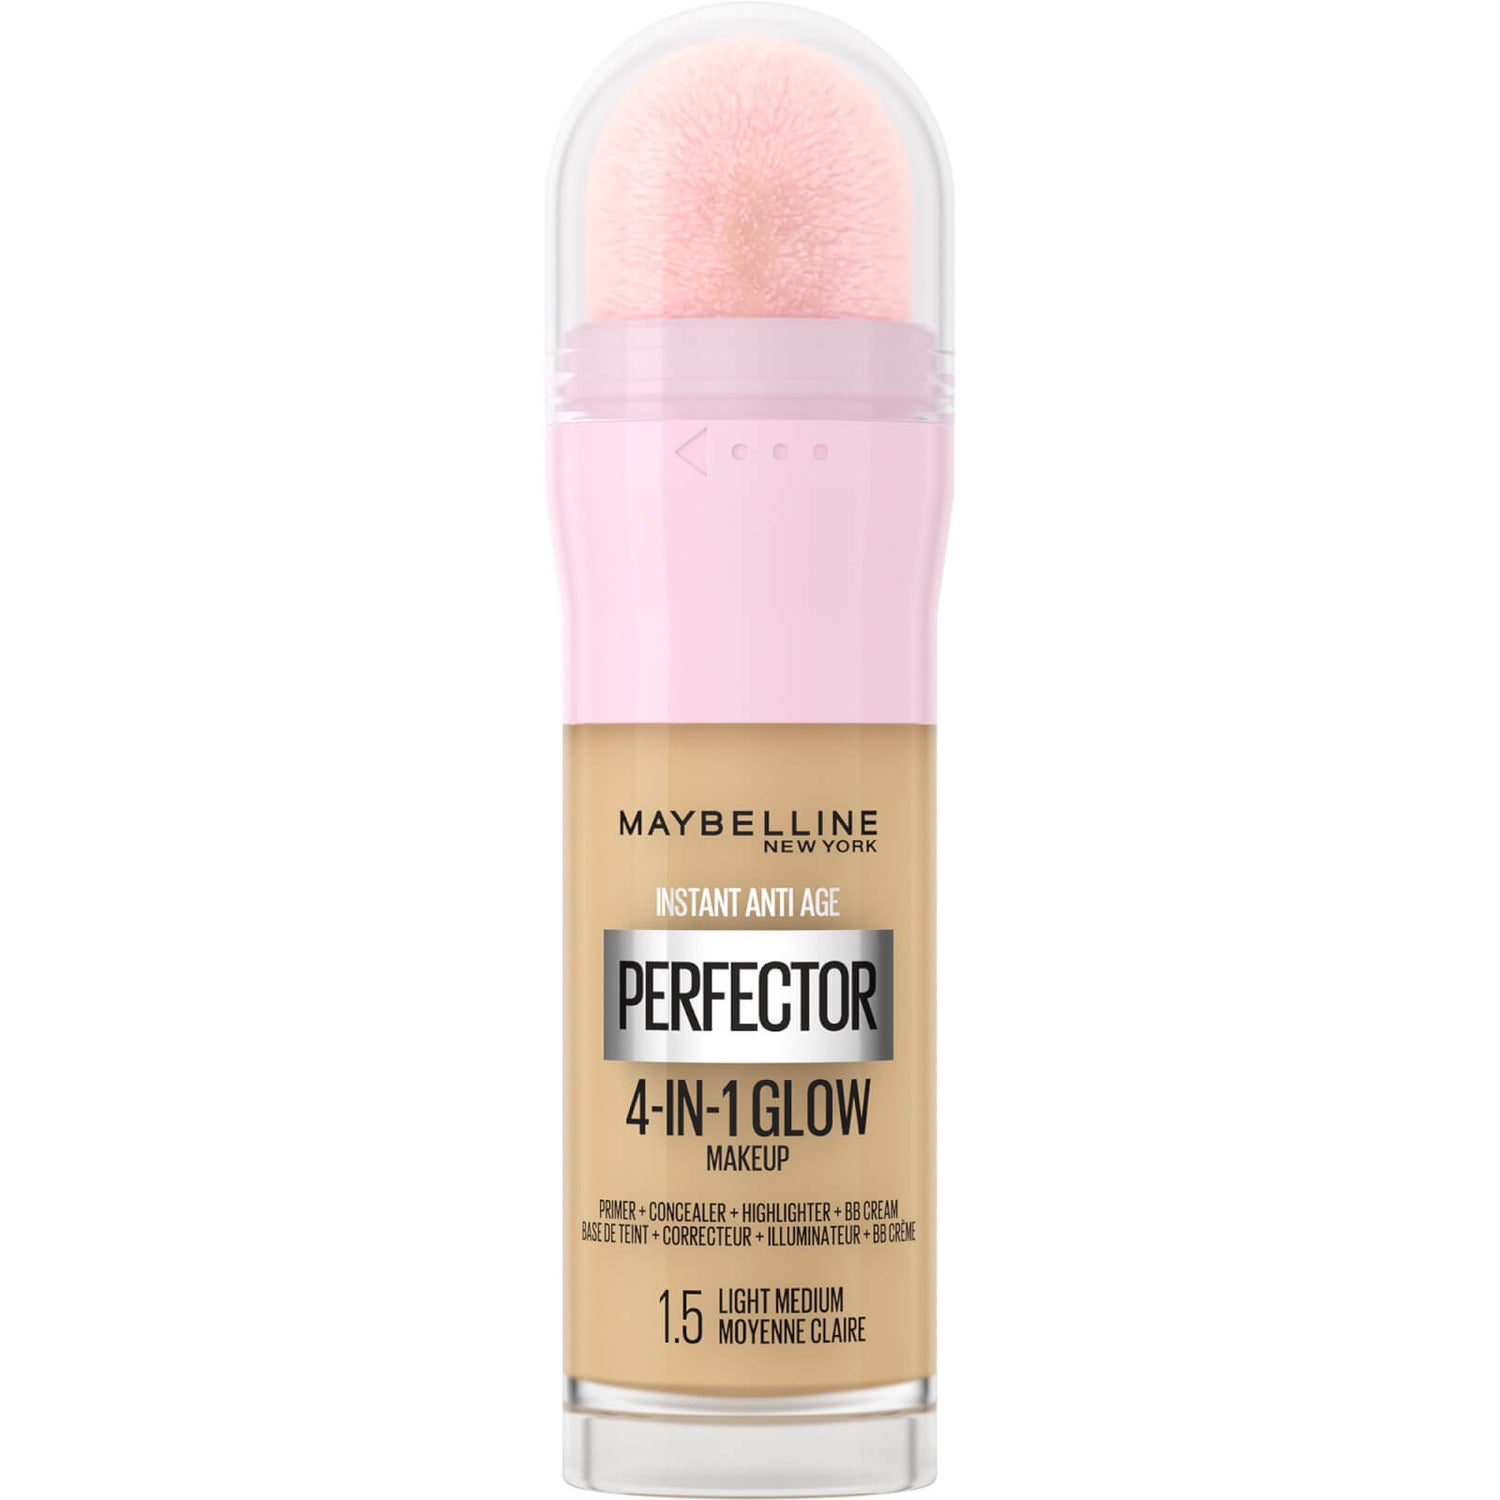 Maybelline Instant Anti Age Perfector 4-in-1 Glow Primer, Concealer, Highlighter, BB Cream 20ml (Various Shades)